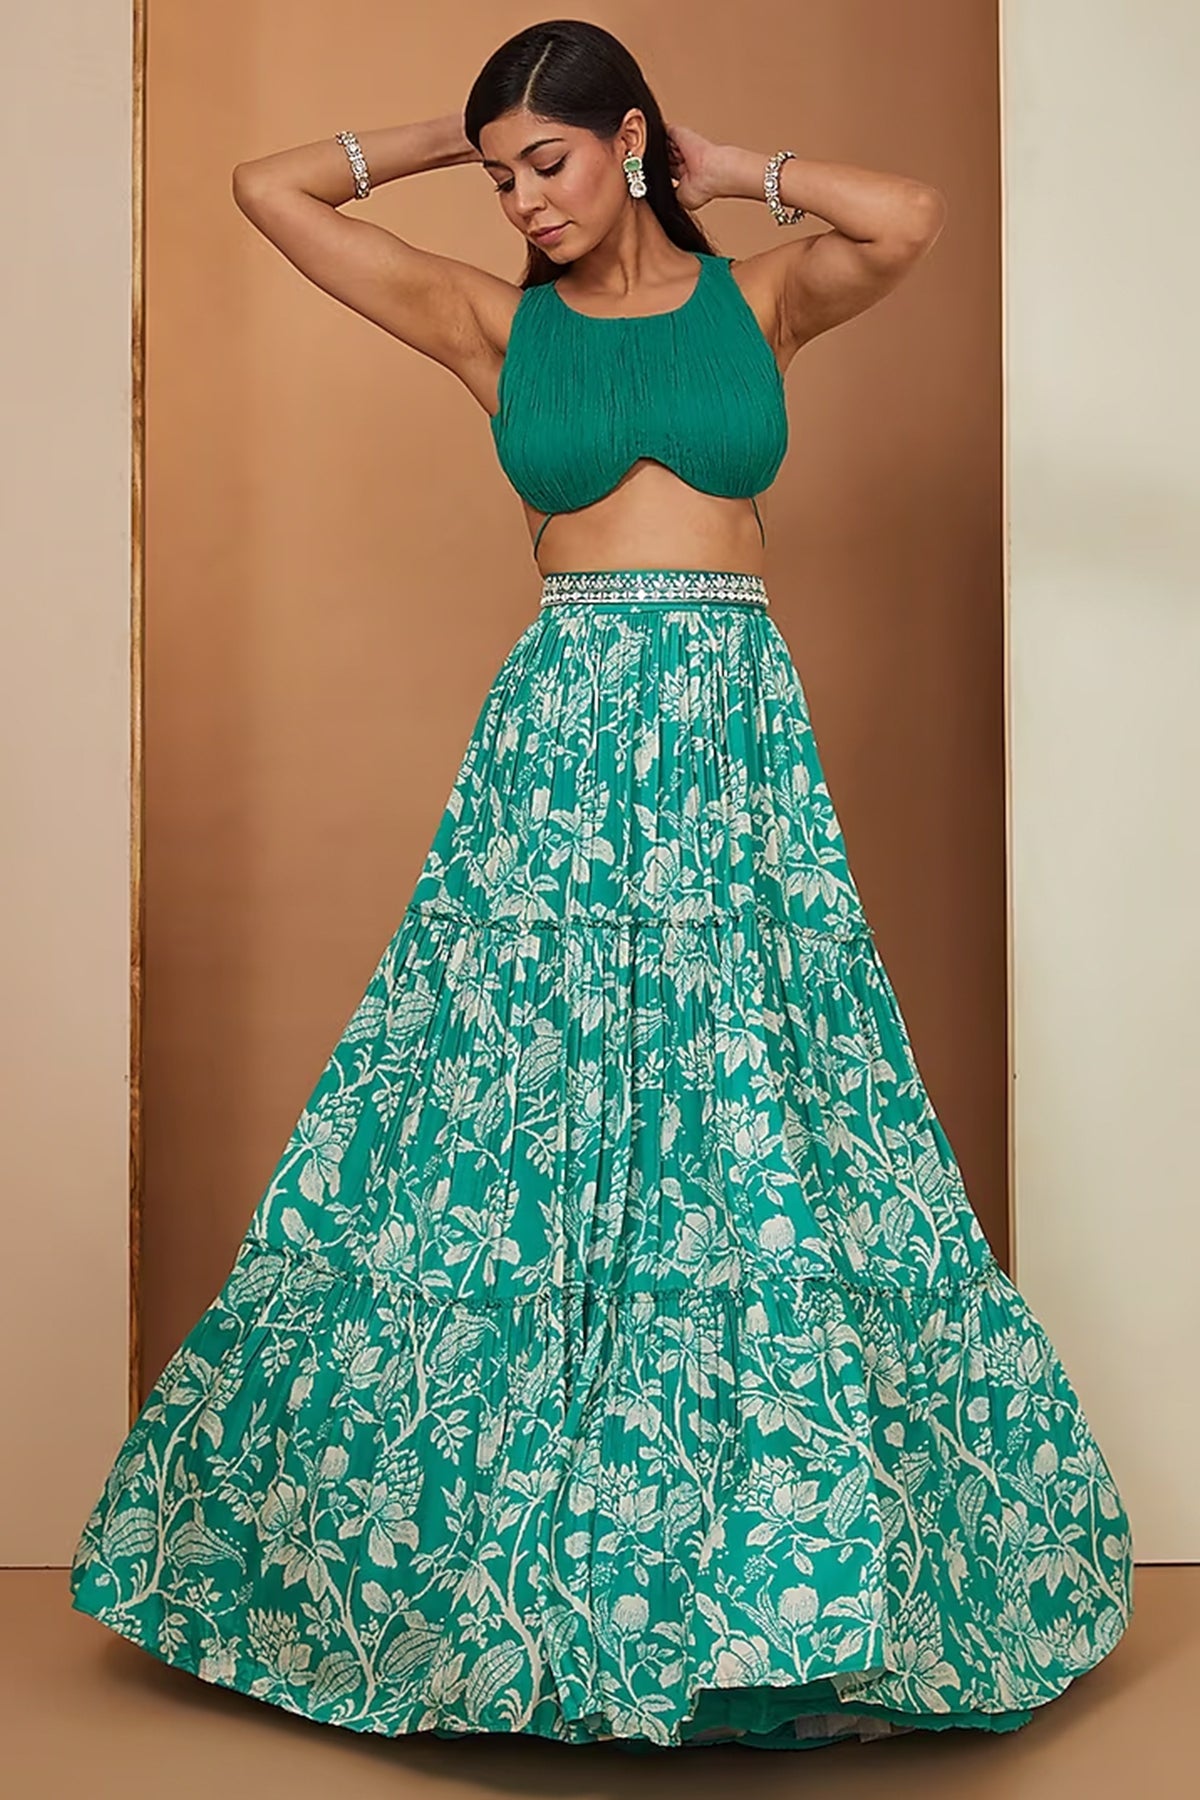 teal printed skirt with drap blouse